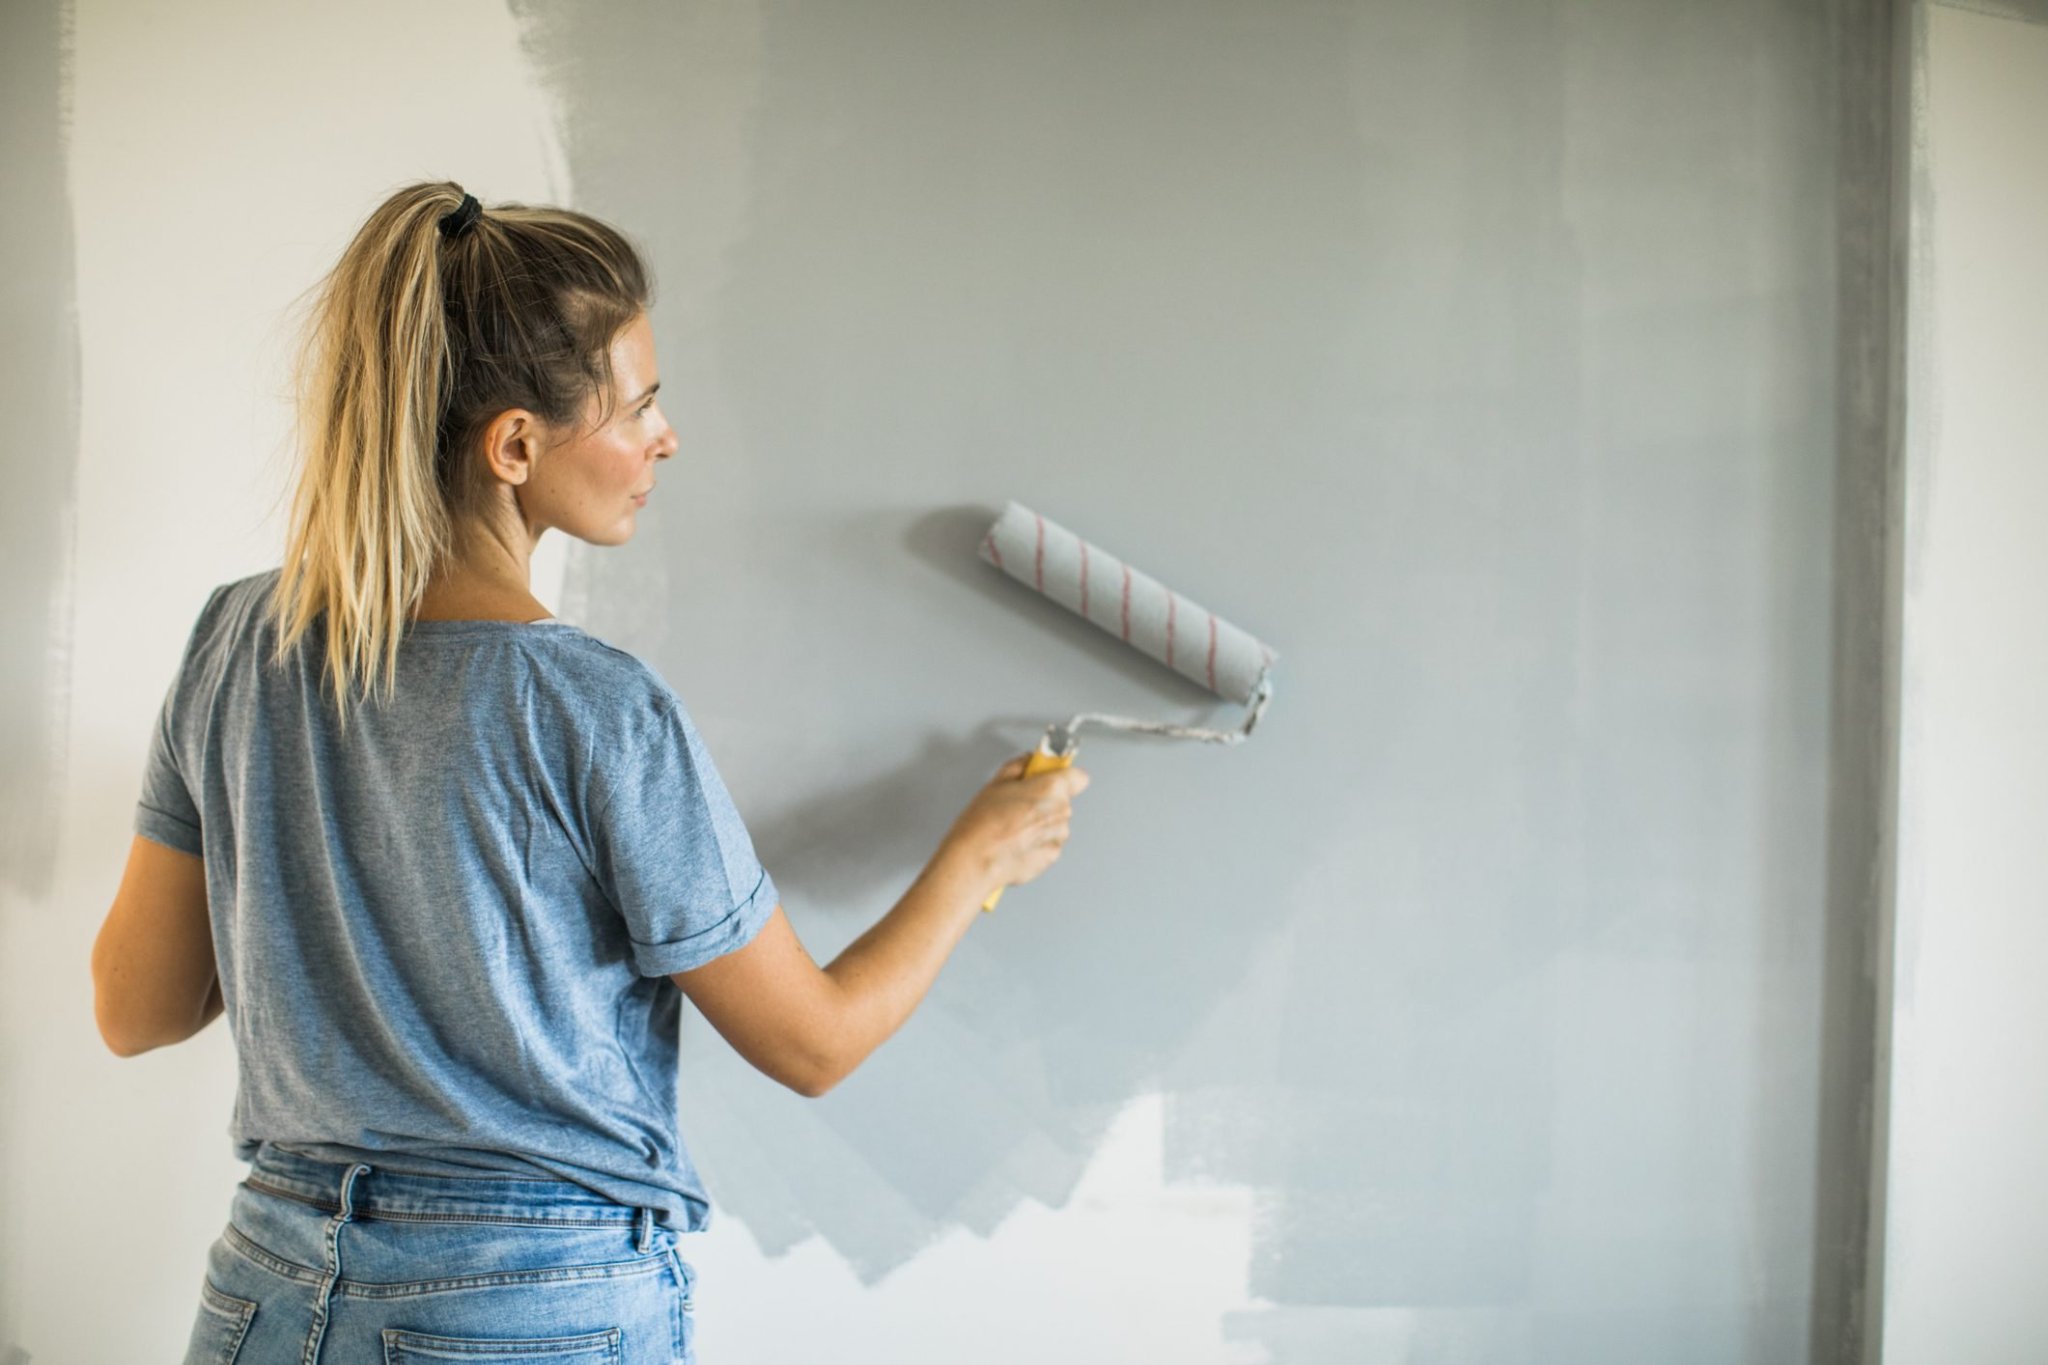 11 Painting Shortcuts That Do More Harm Than Good